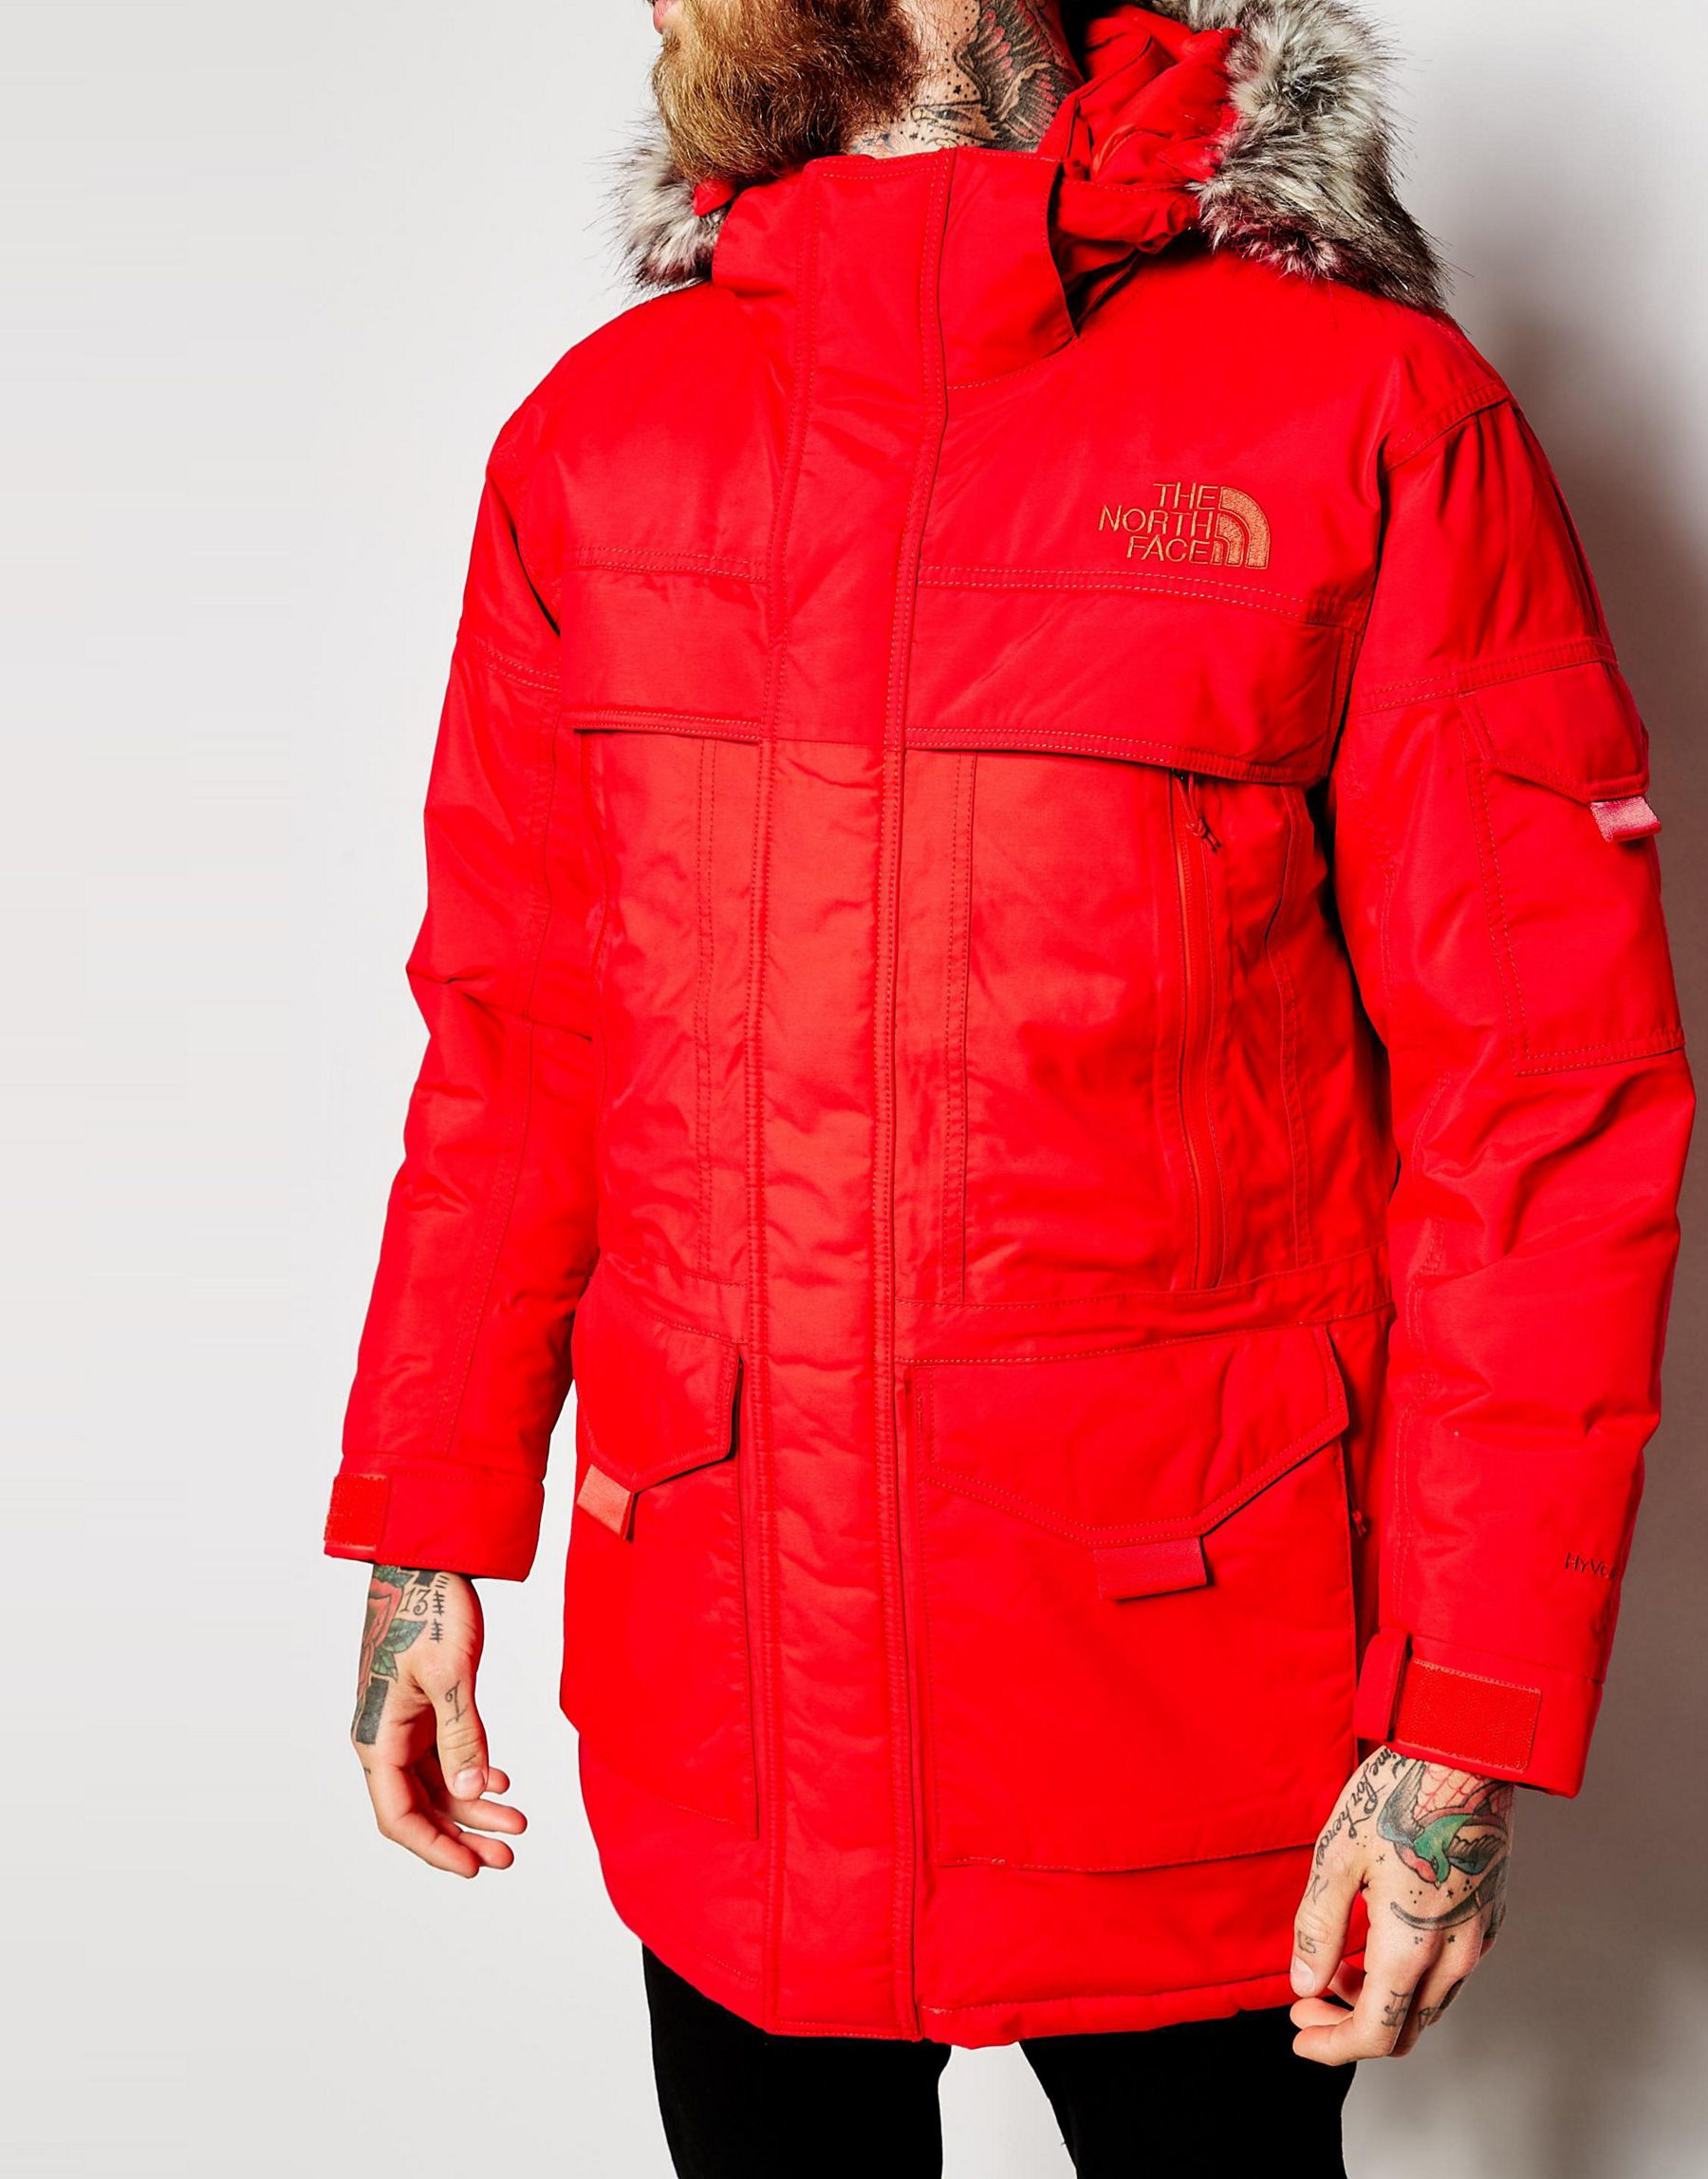 The North Face Synthetic Mcmurdo 2 Down Parka in Red for Men - Lyst